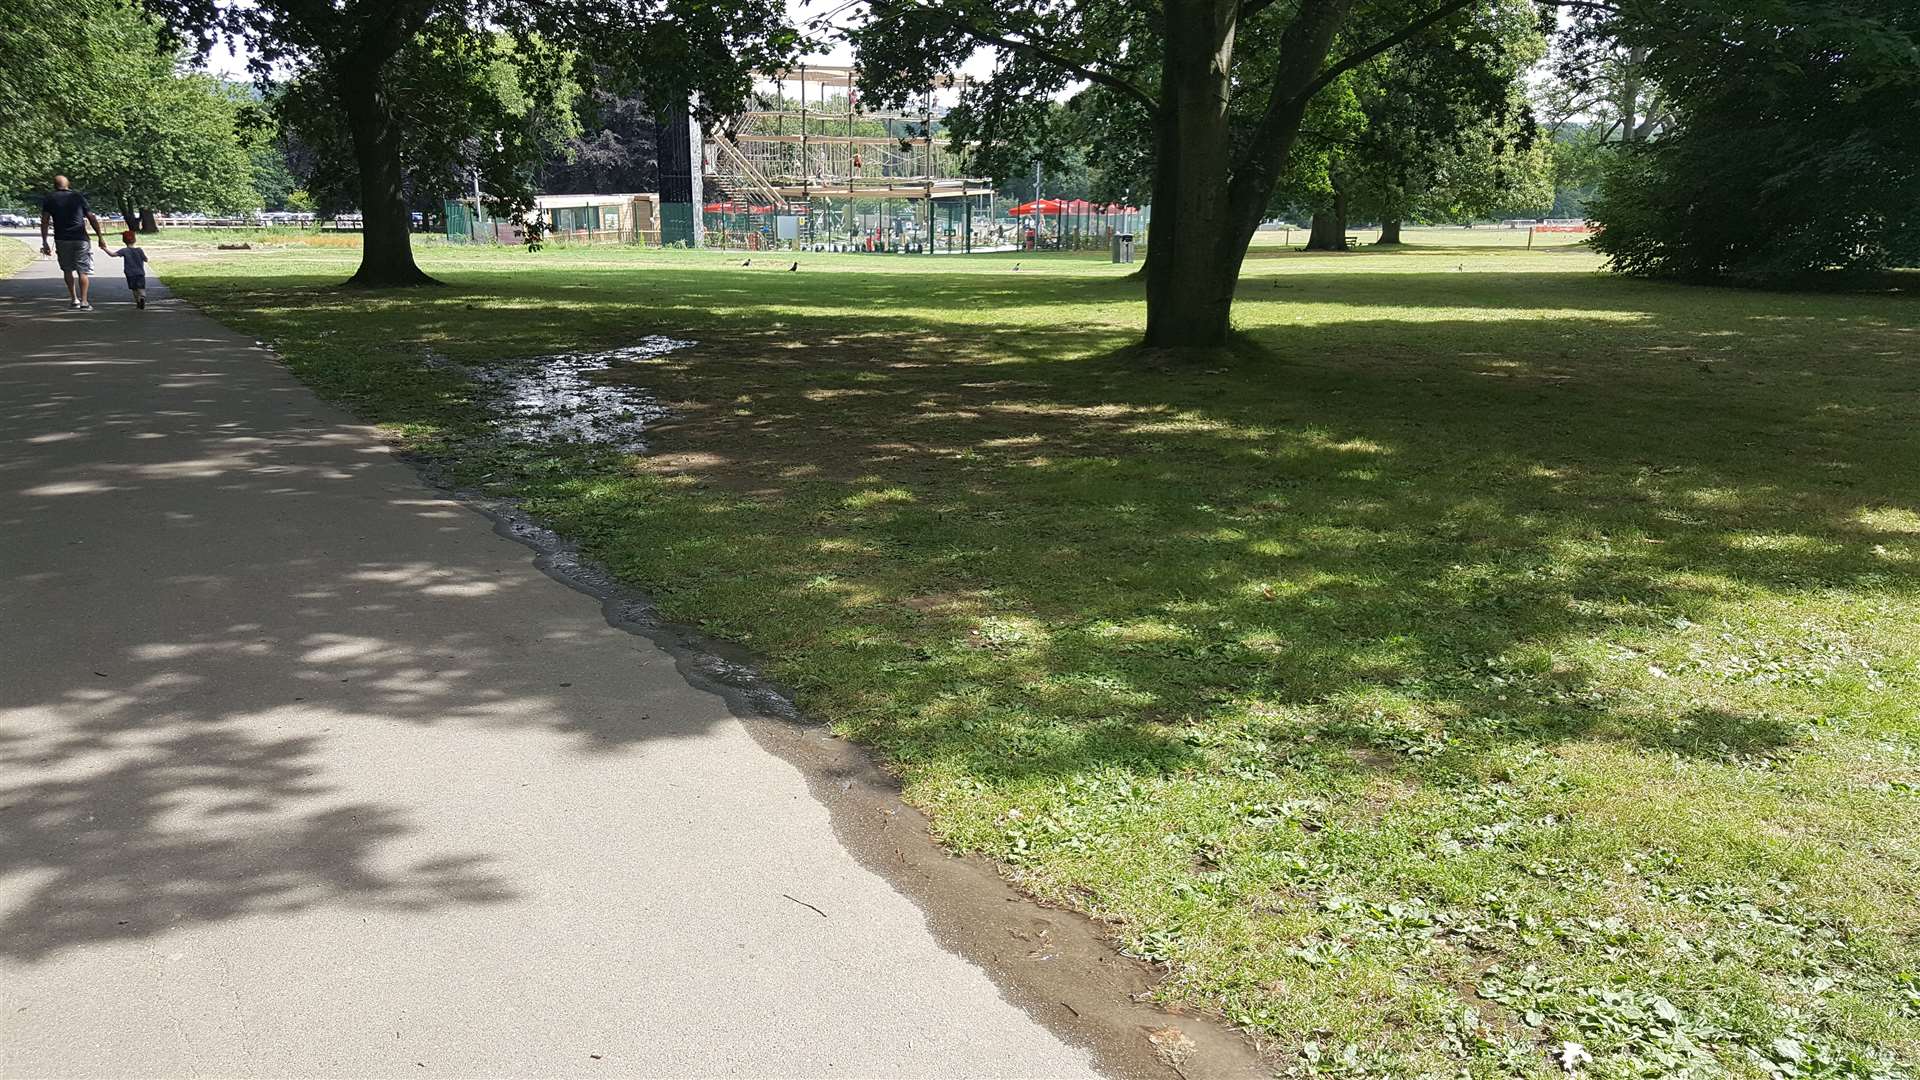 The sewage is running towards the children's play area (14117441)